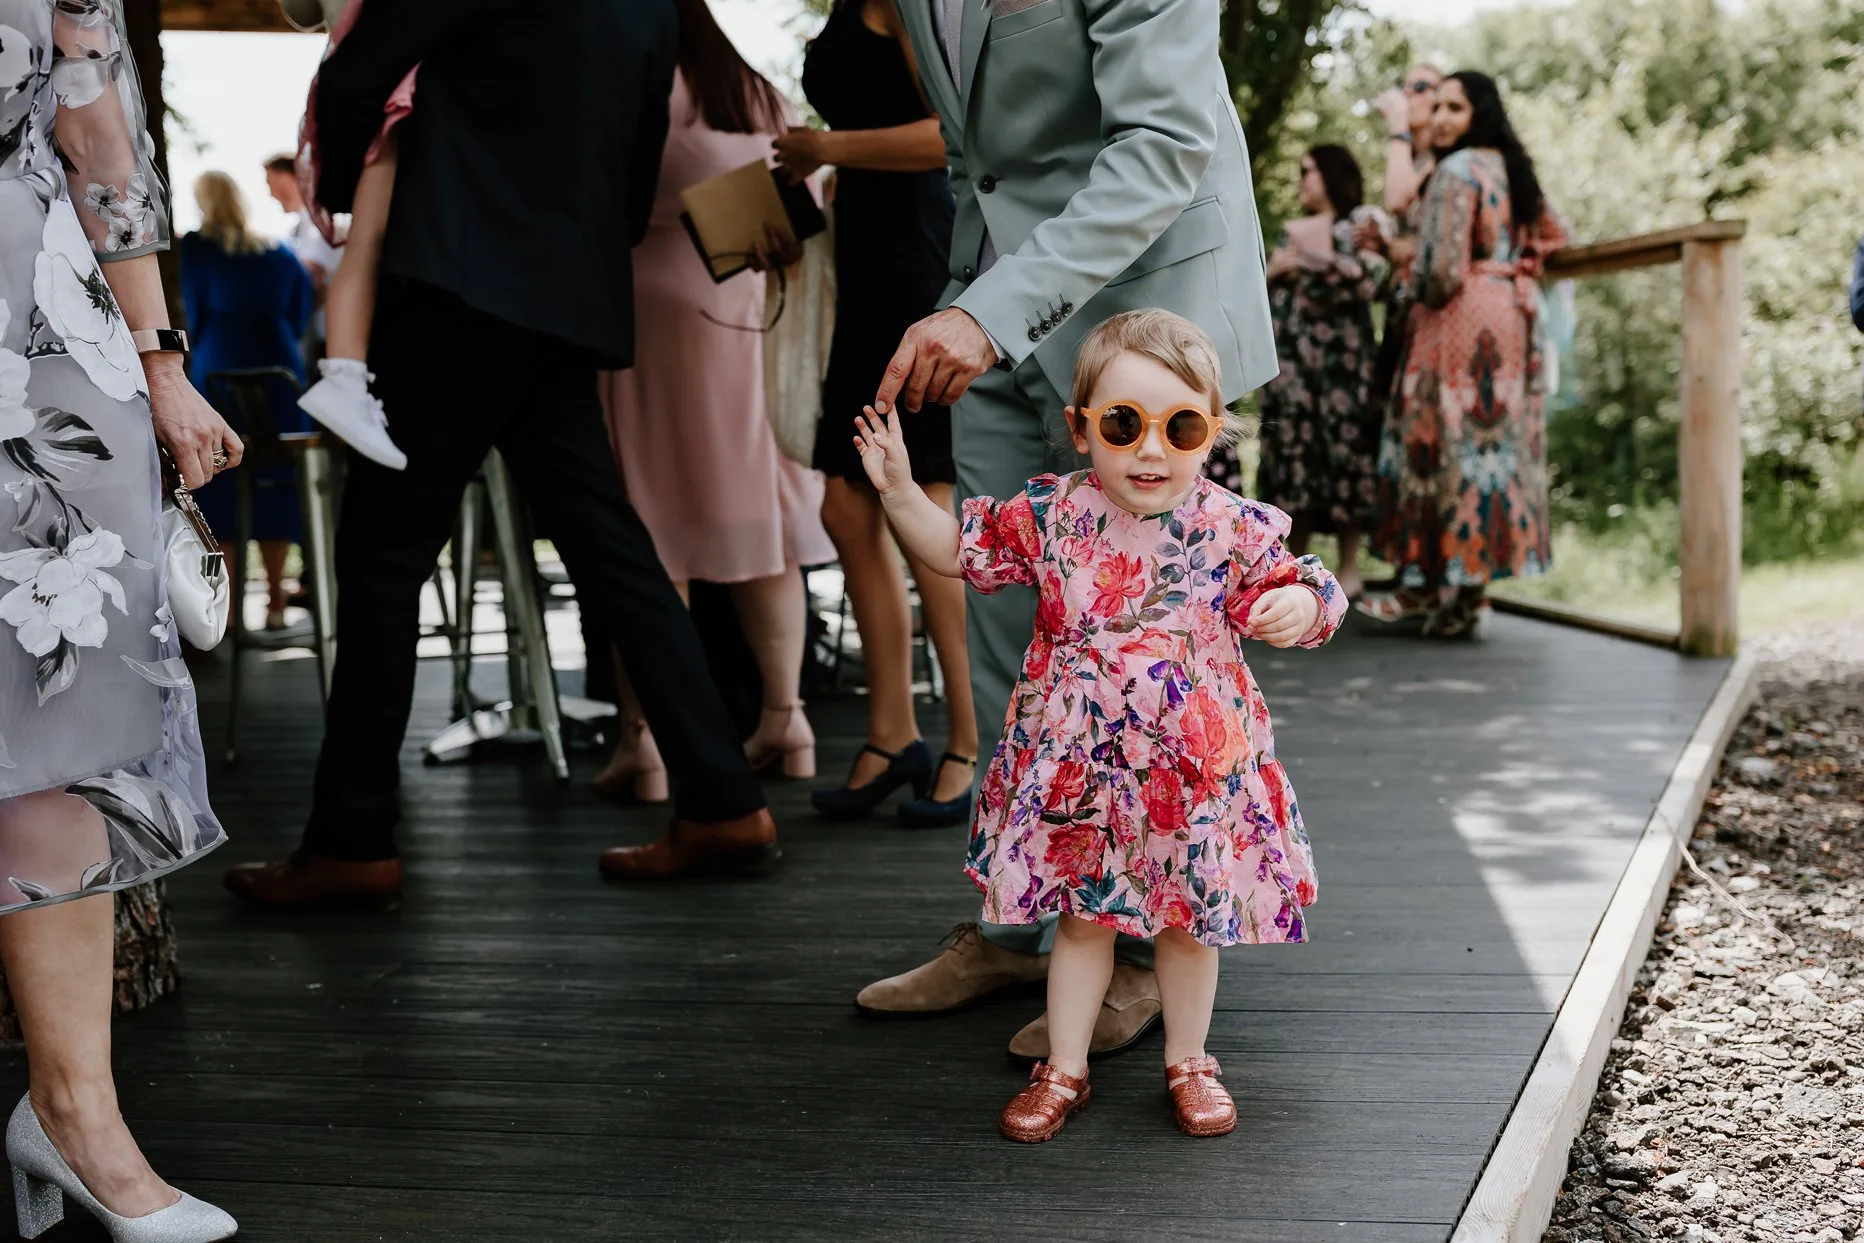 Young wedding guest wearing sunglasses stood outside waiting for the wedding ceremony to start. She is smiling at the camera and wearing a bright pink dress.